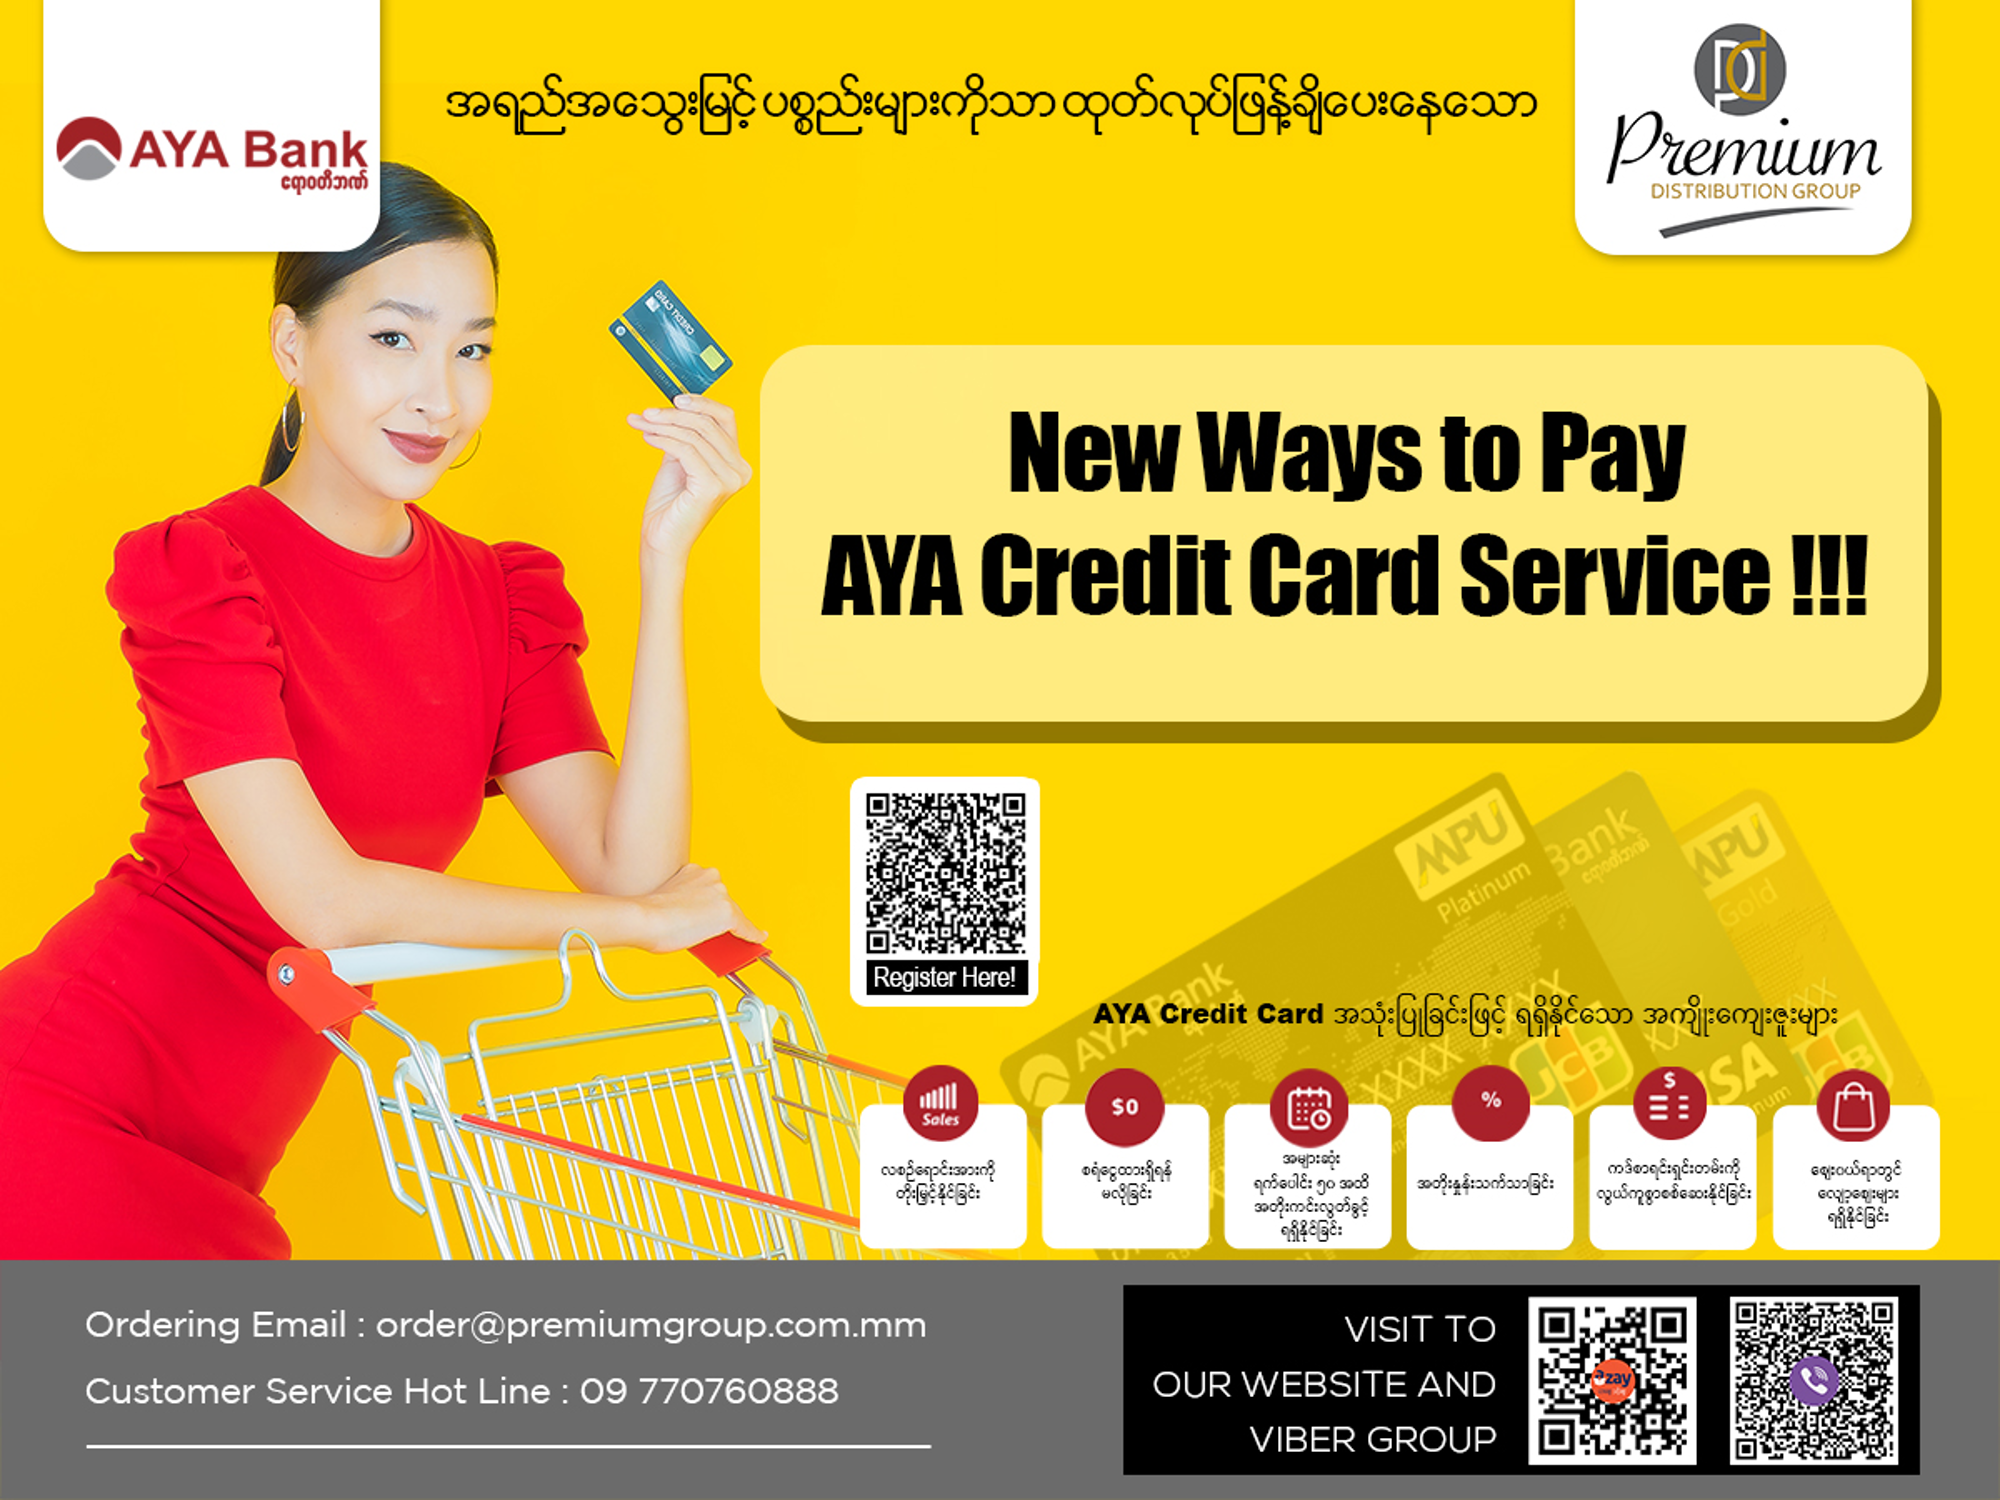 Streamline Your Business Payments with AYA Credit Cards!